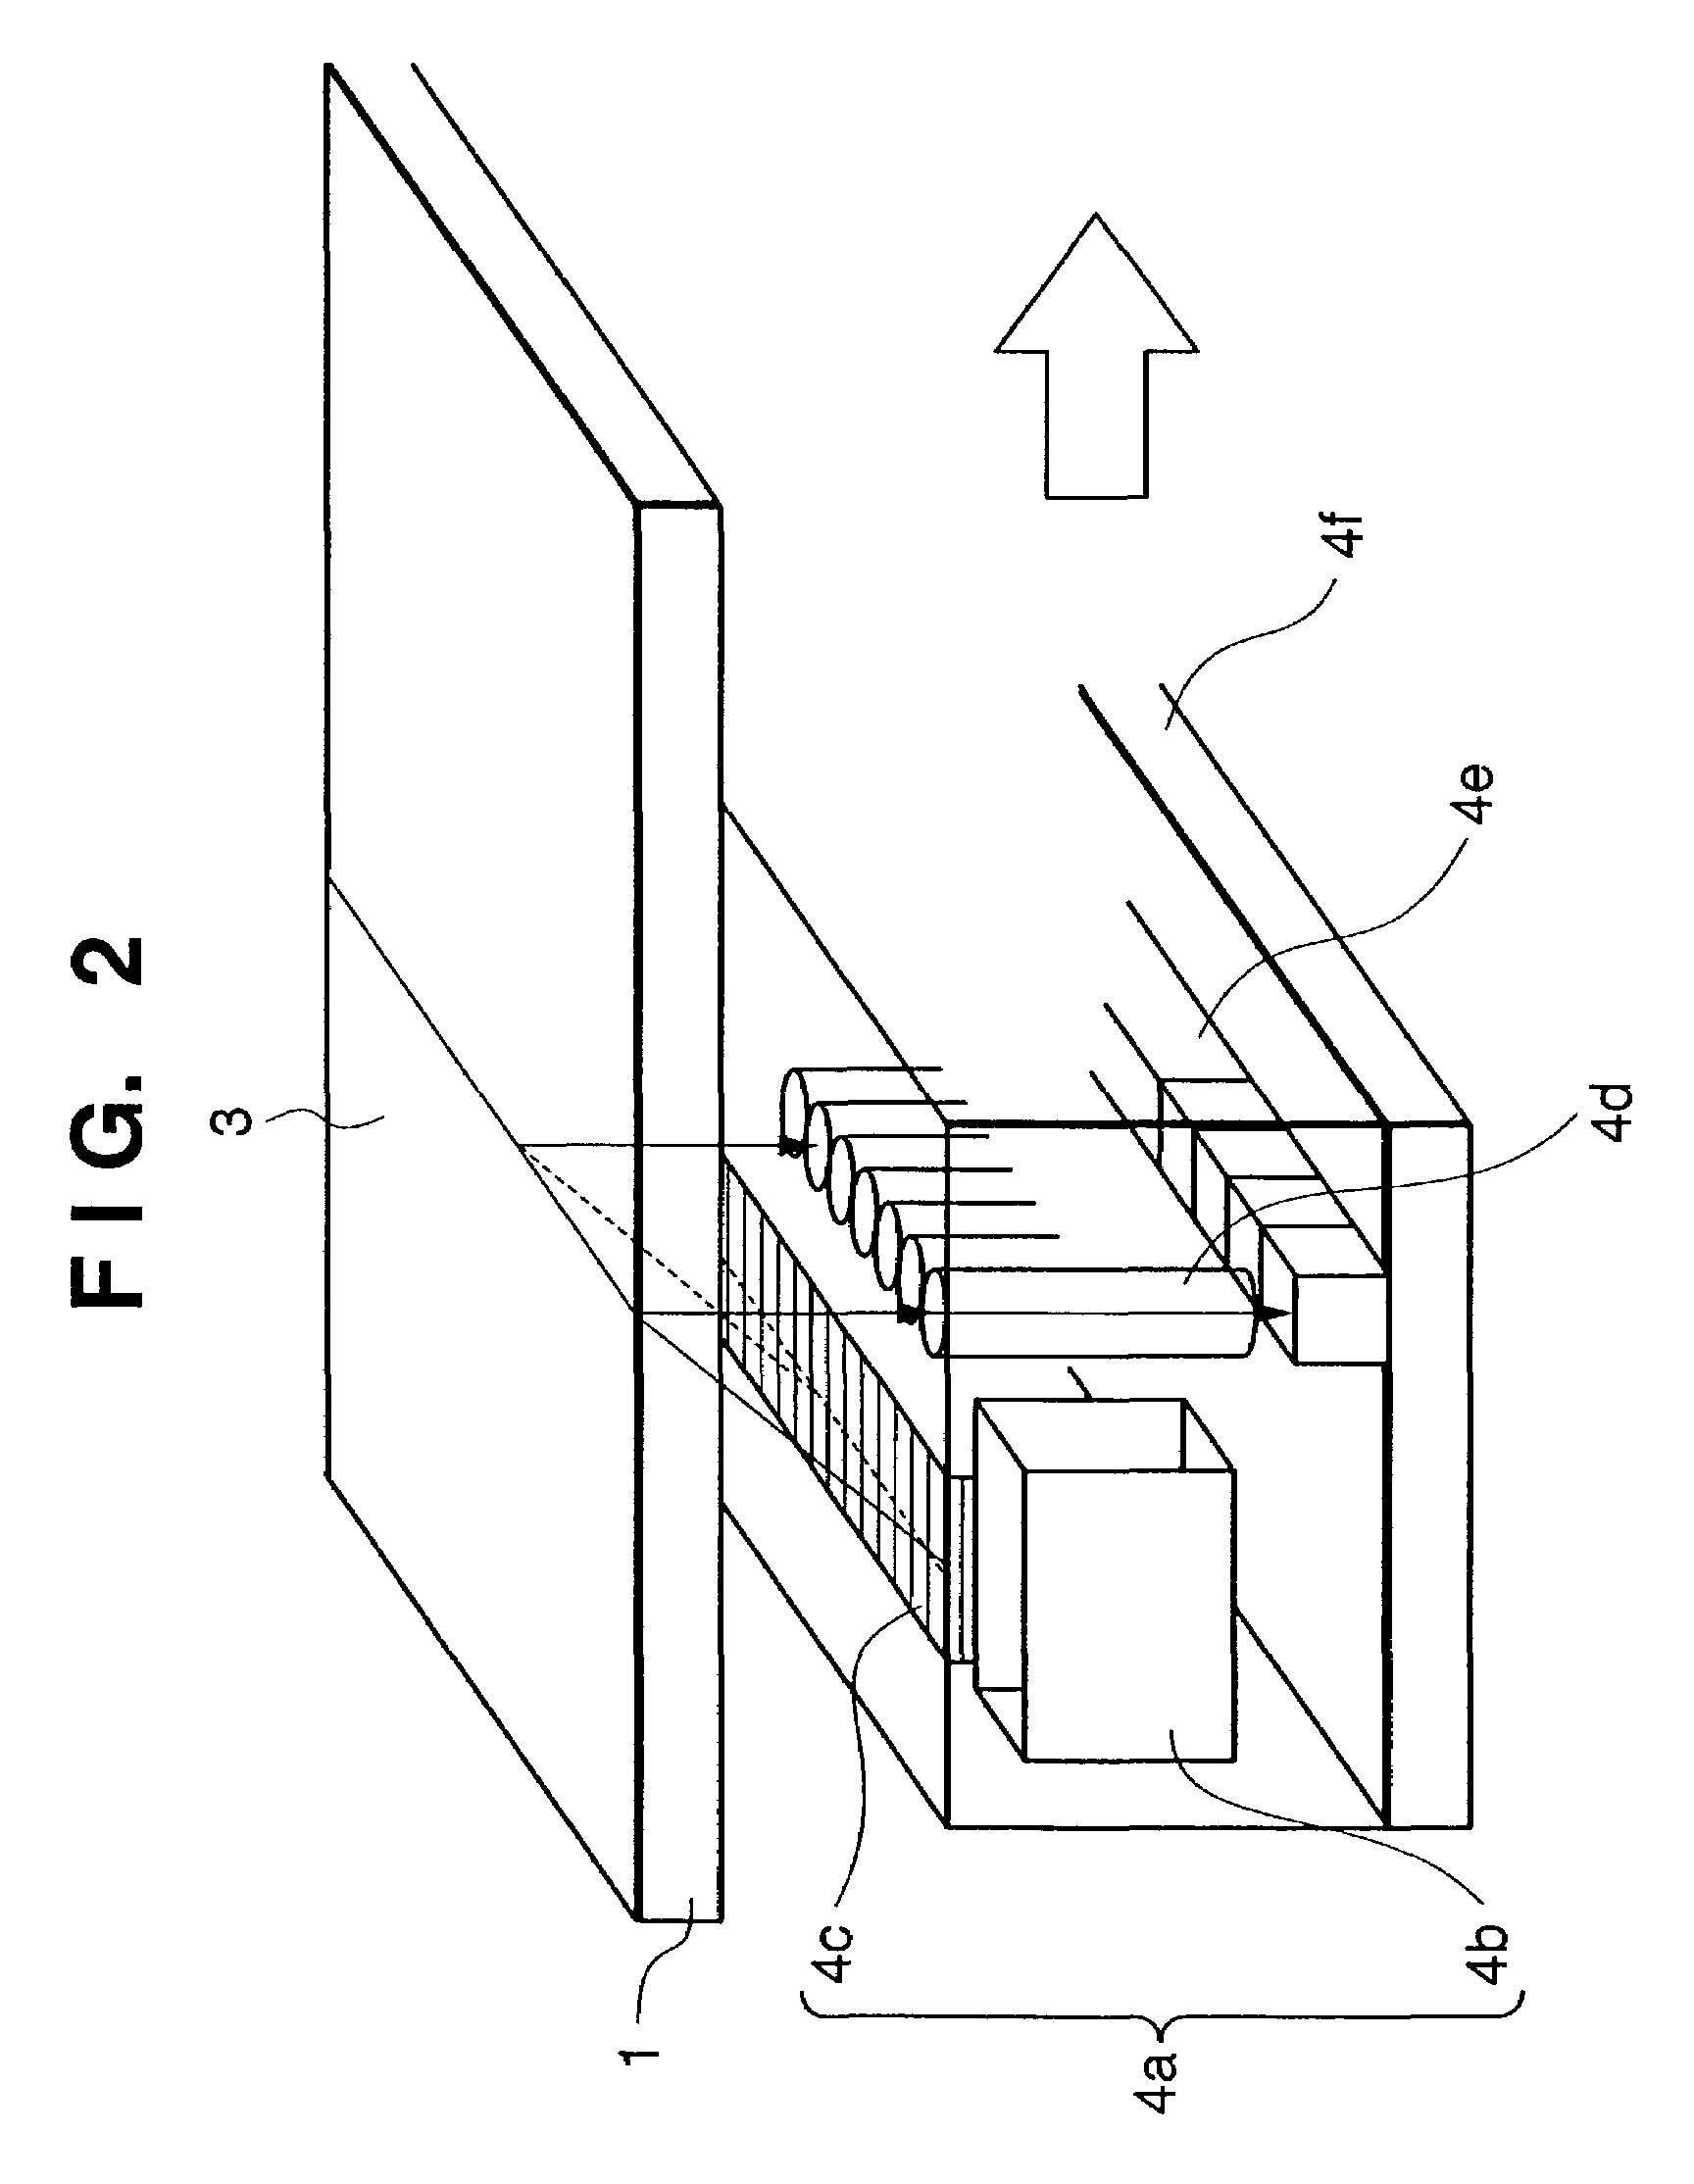 Processing of signals from image sensing apparatus whose image sensing area includes a plurality of areas